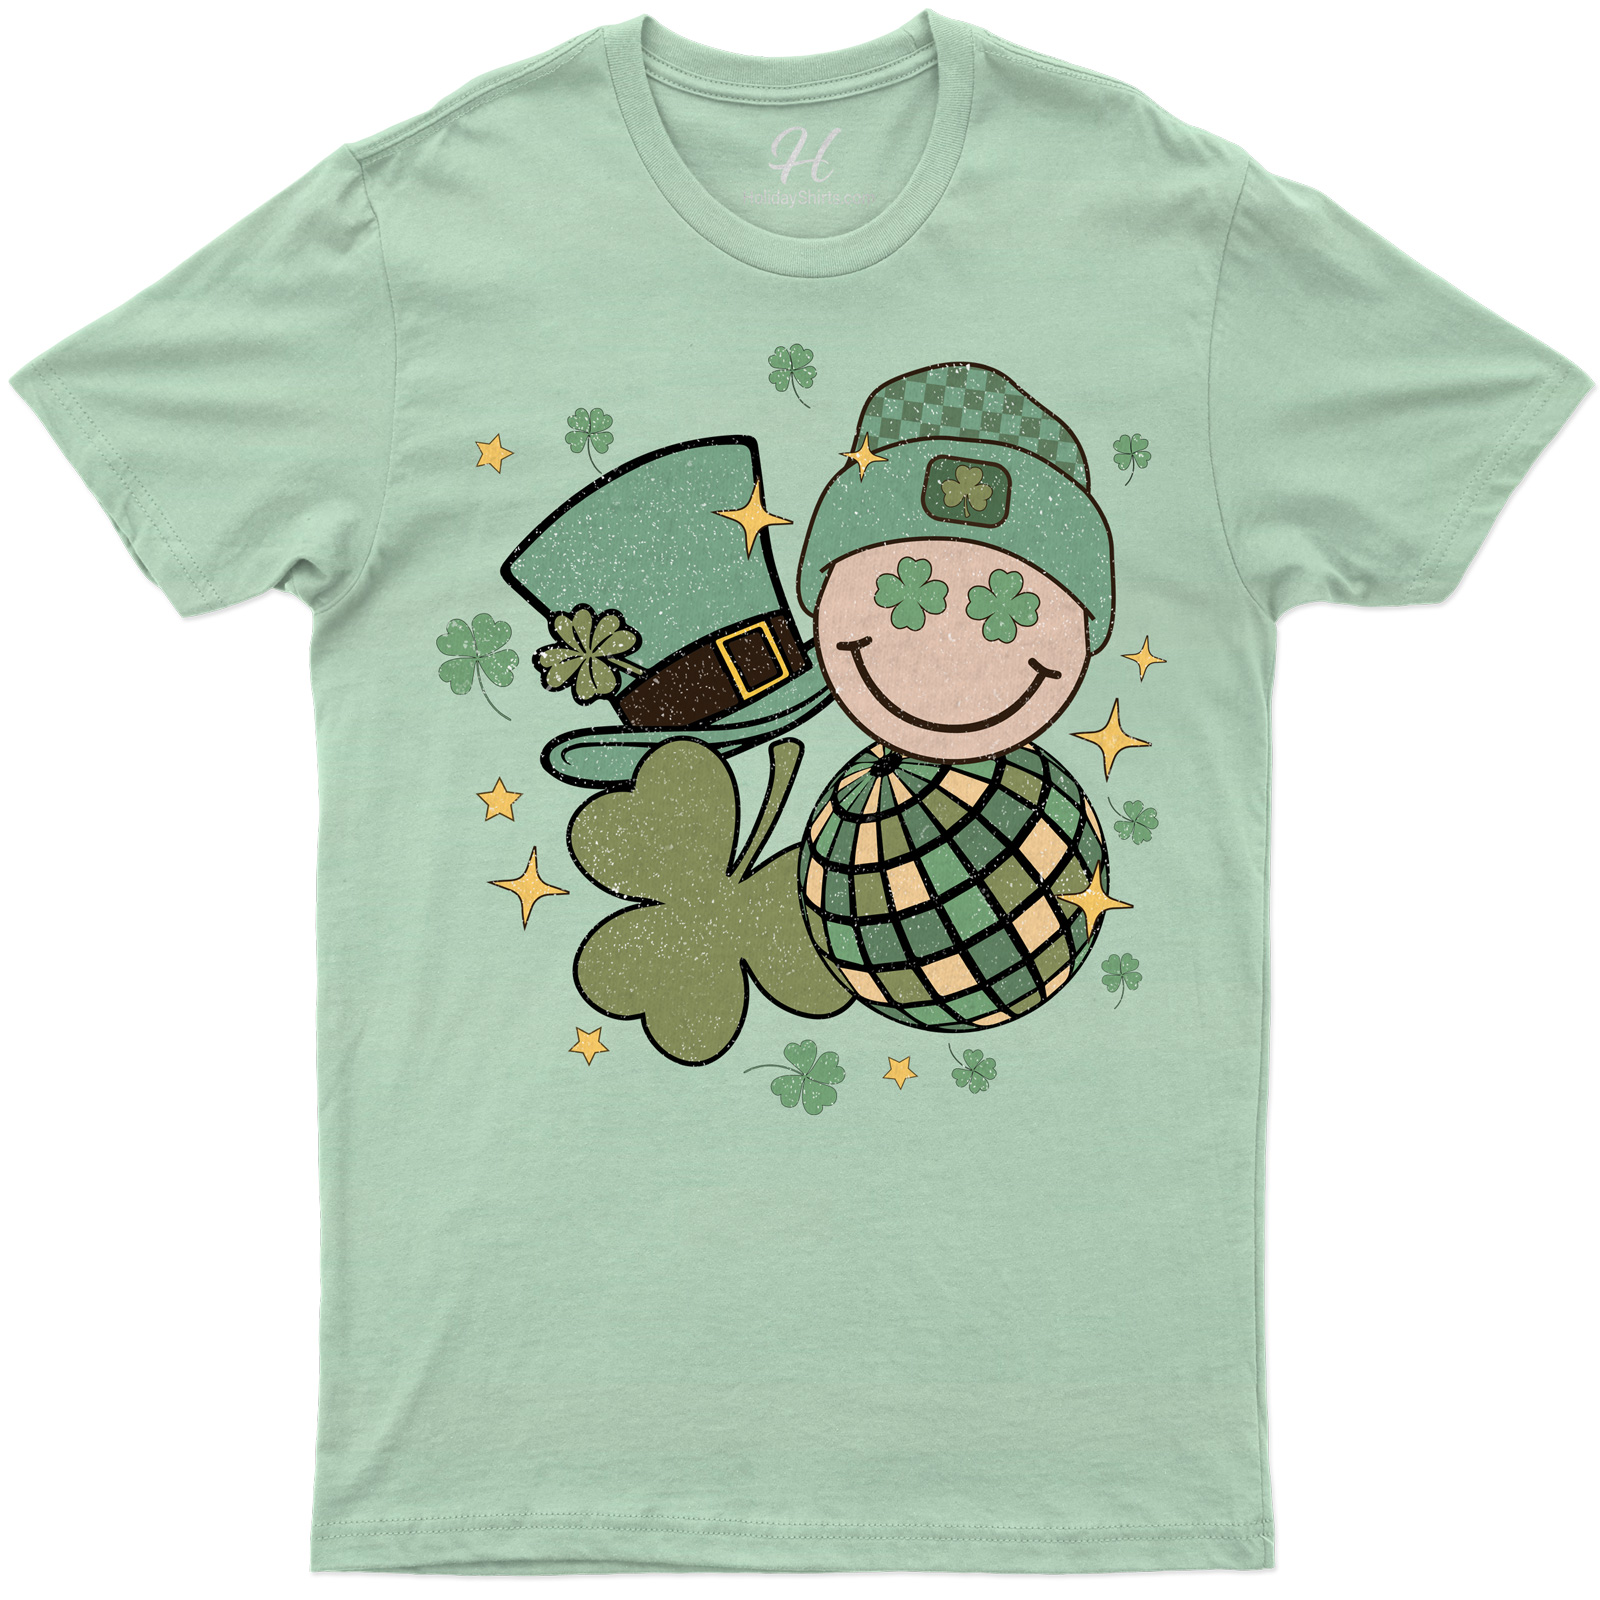 Lucky Charm Smiling Leprechaun Graphic Tee For St. Patrick's Day Celebrations